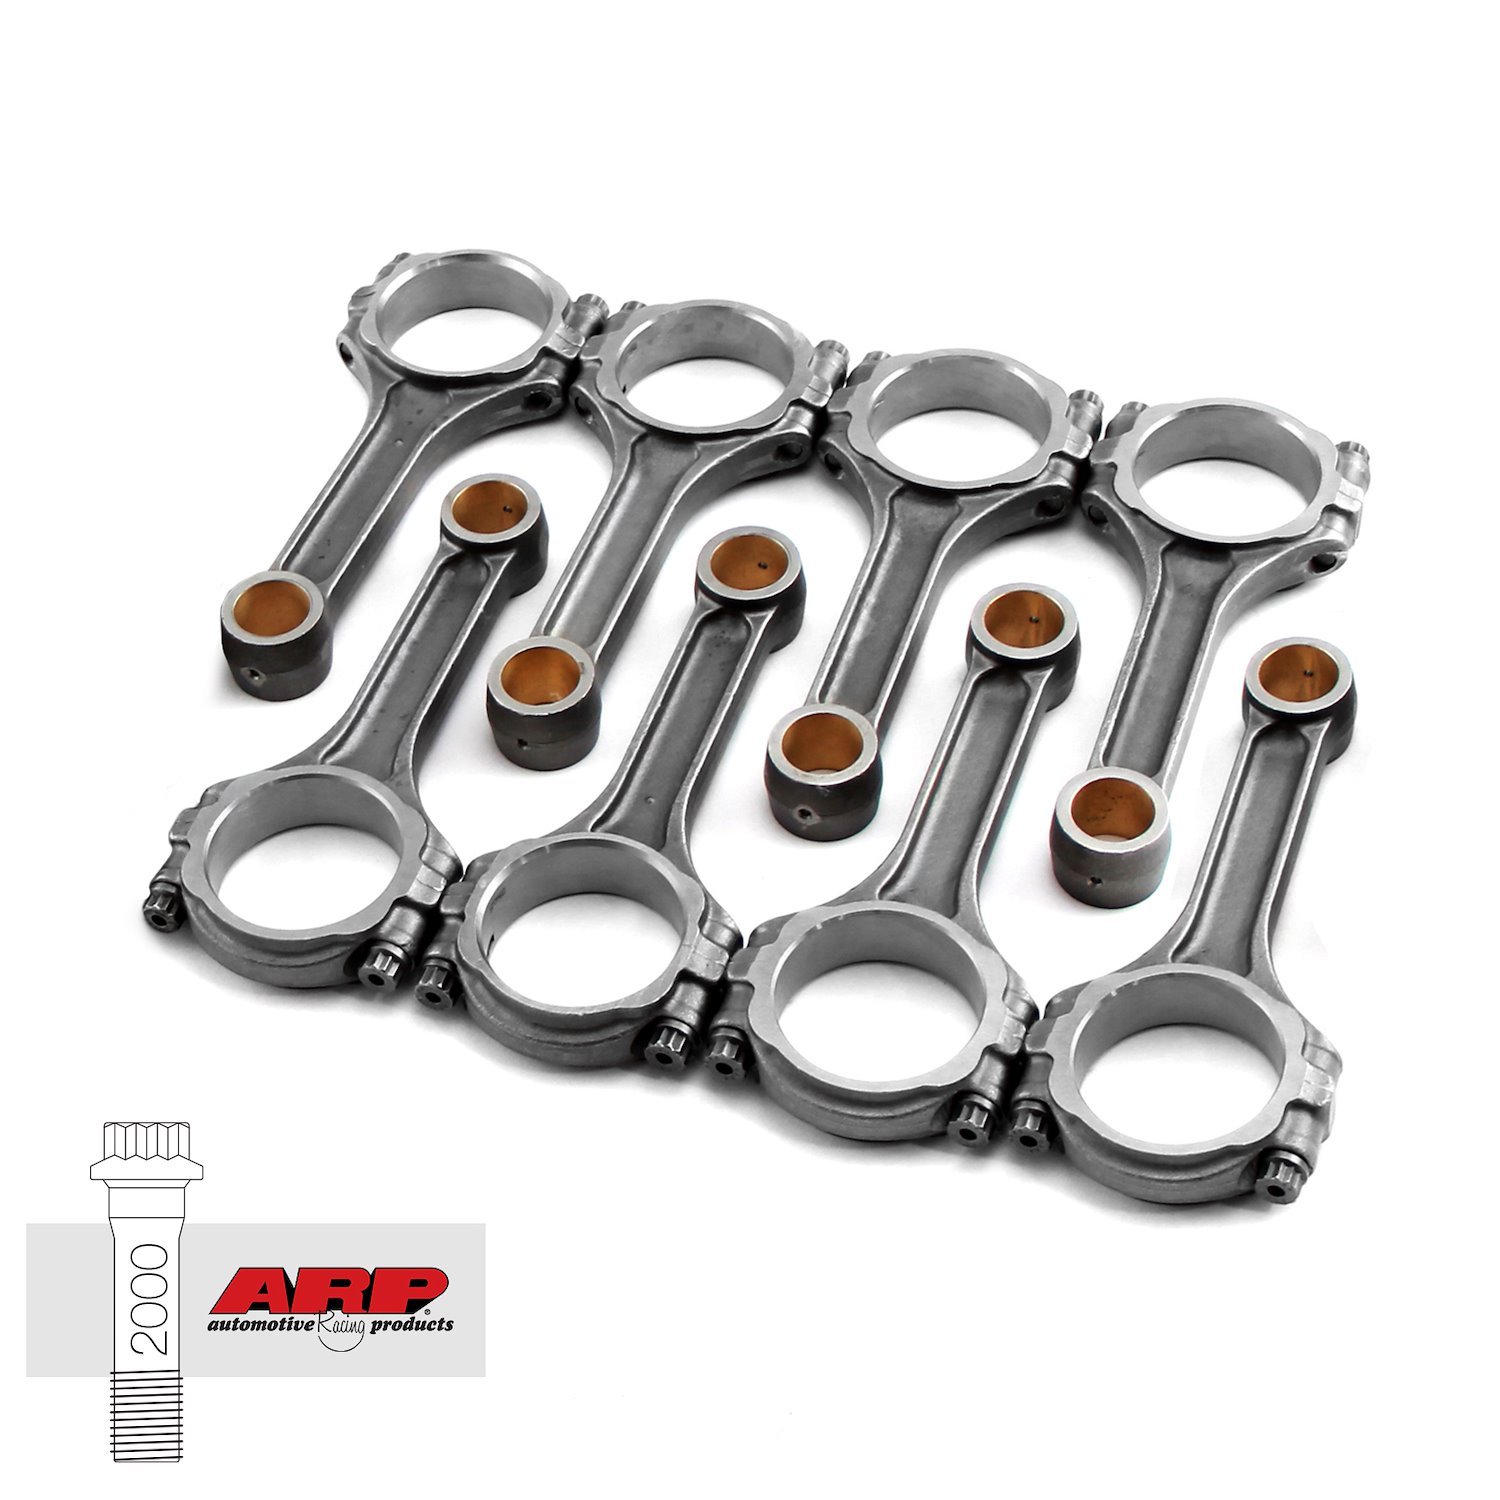 I BEAM 5.956 2.310 .912 5140 CONNECTING RODS